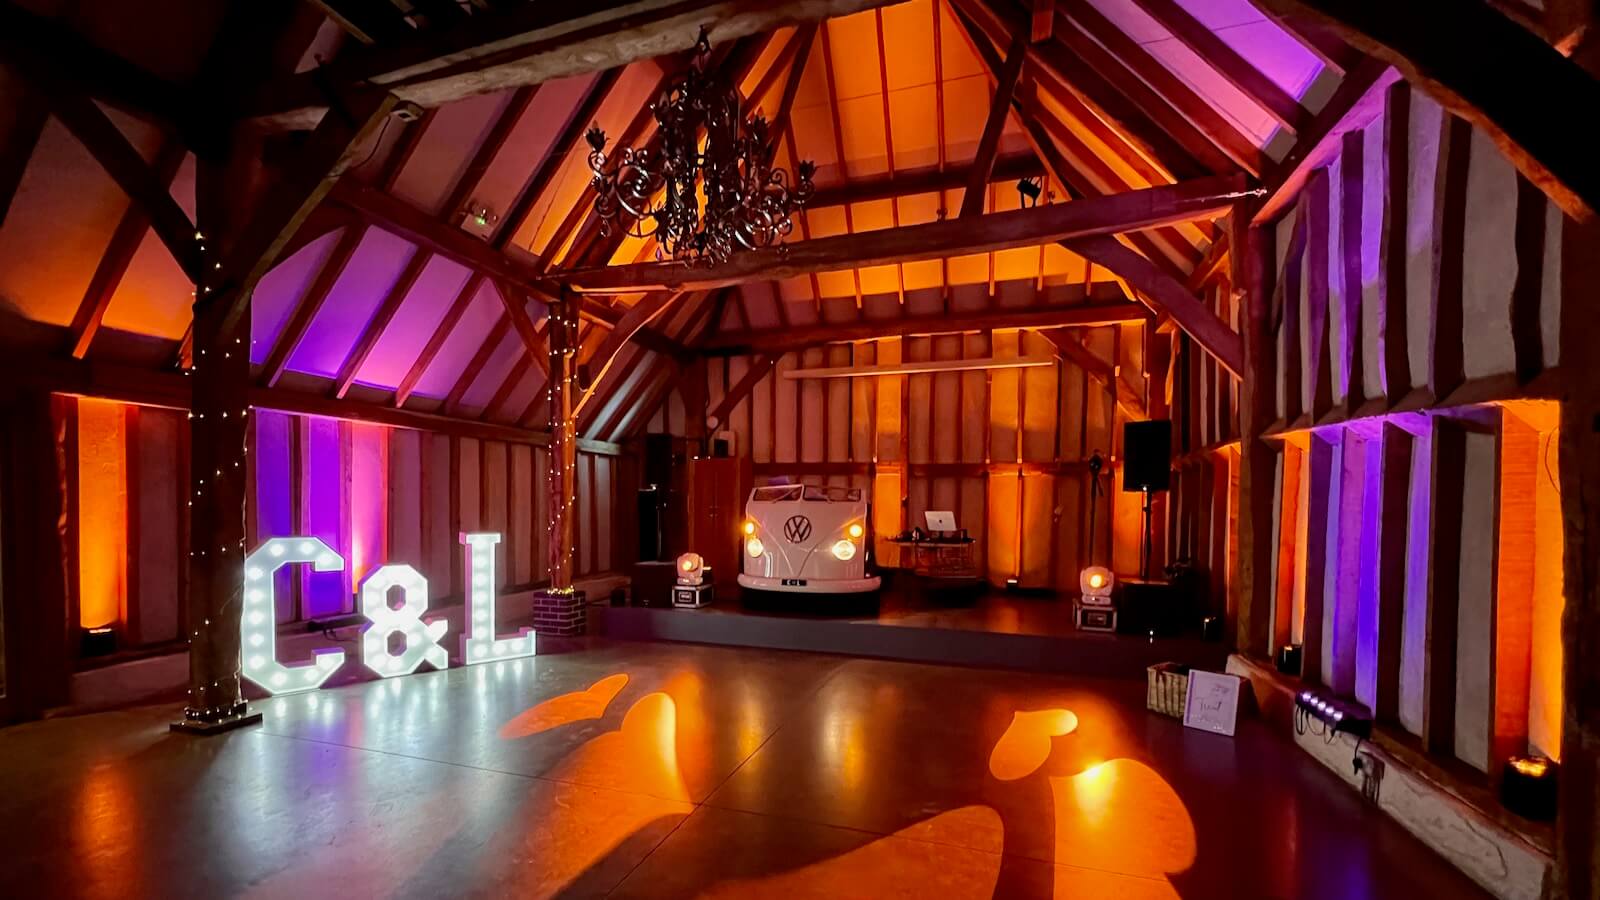 Brian Mole wedding DJ with VW DJ booth, working alongside a singer at Southend Barns